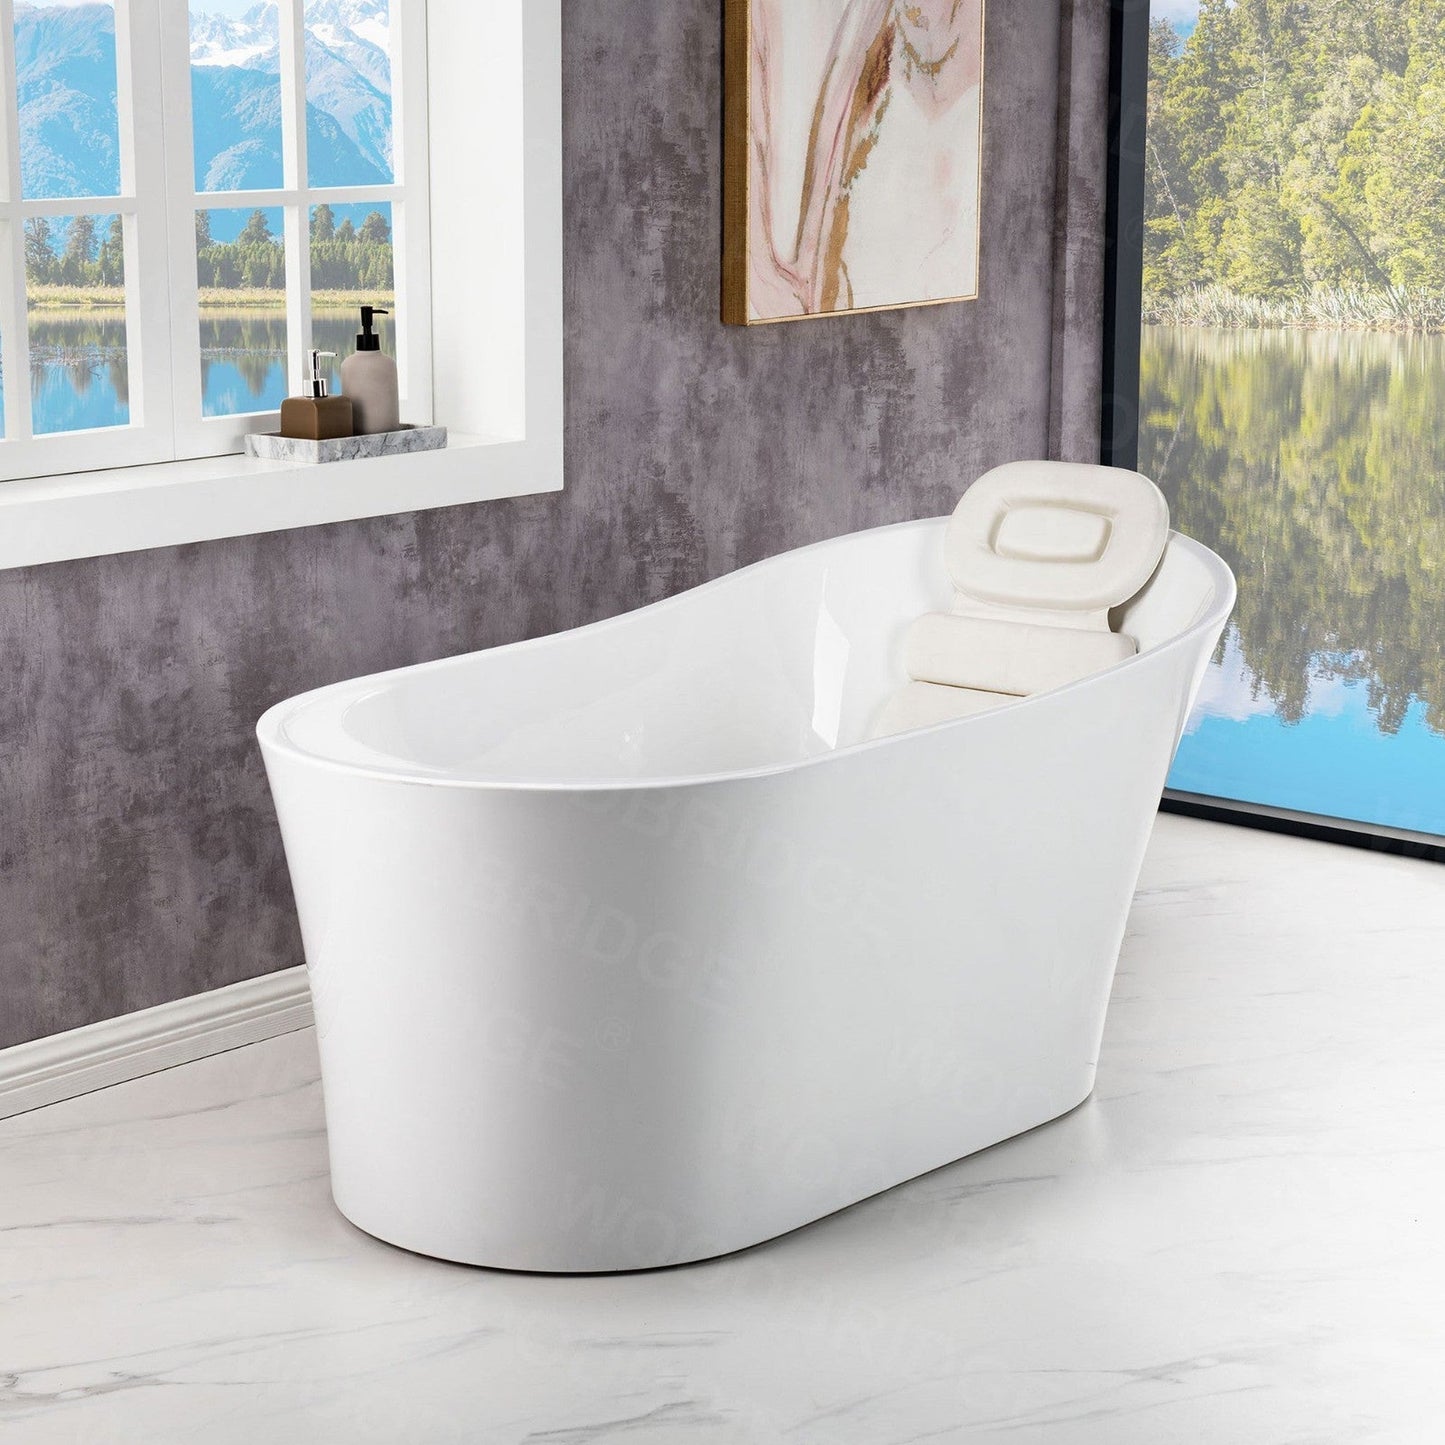 WoodBridge B0084 67" White Acrylic Freestanding Soaking Bathtub With Brushed Nickel Drain, Overflow, F0070BNVT Tub Filler and Caddy Tray